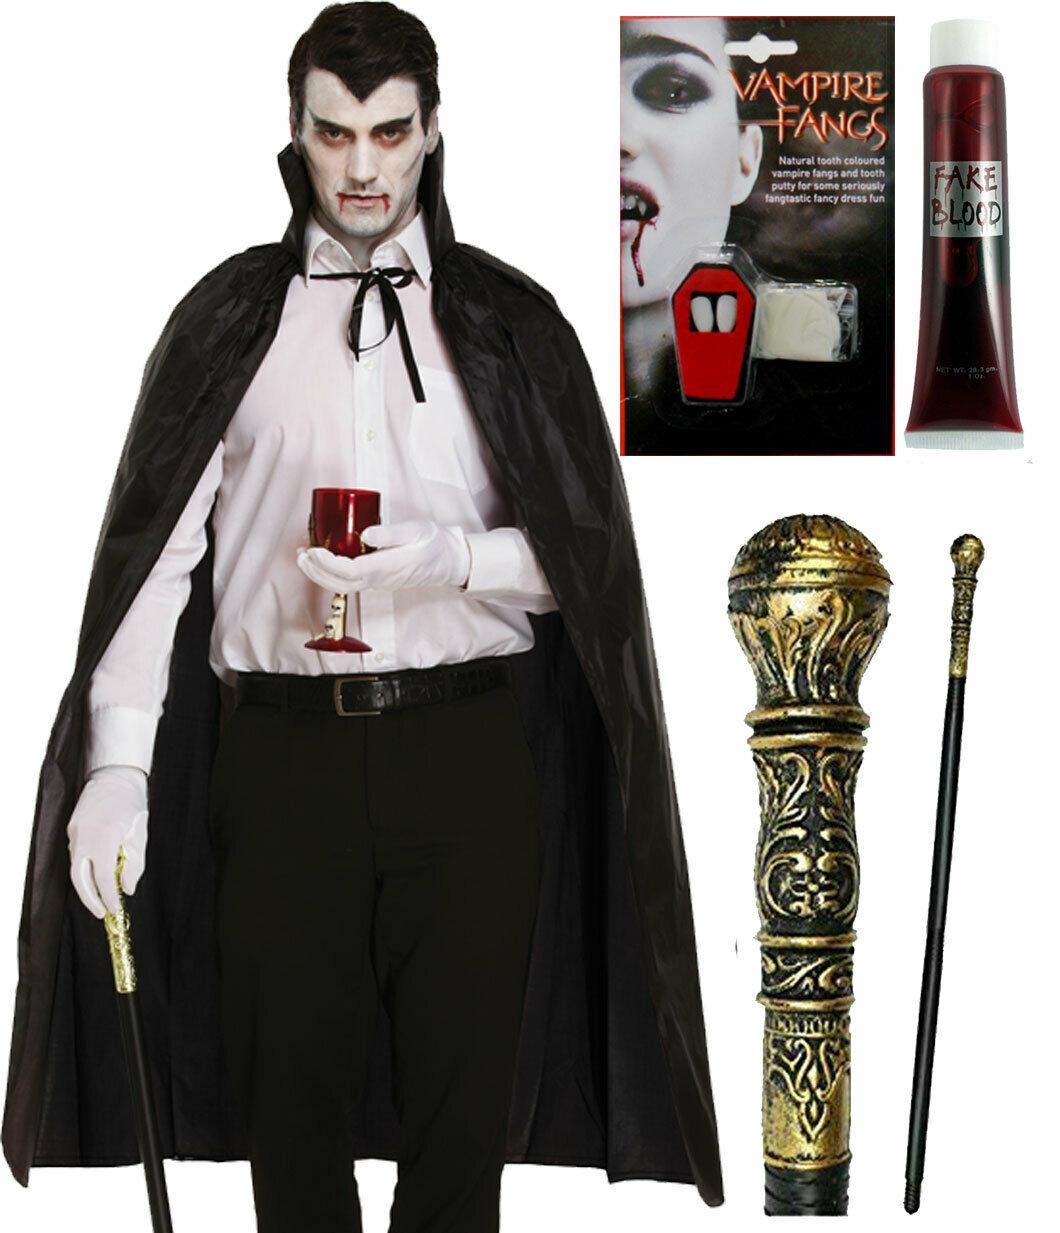 Dracula Vampire Fangs Cape Fake Blood Cane Stick Halloween Party Set - Labreeze